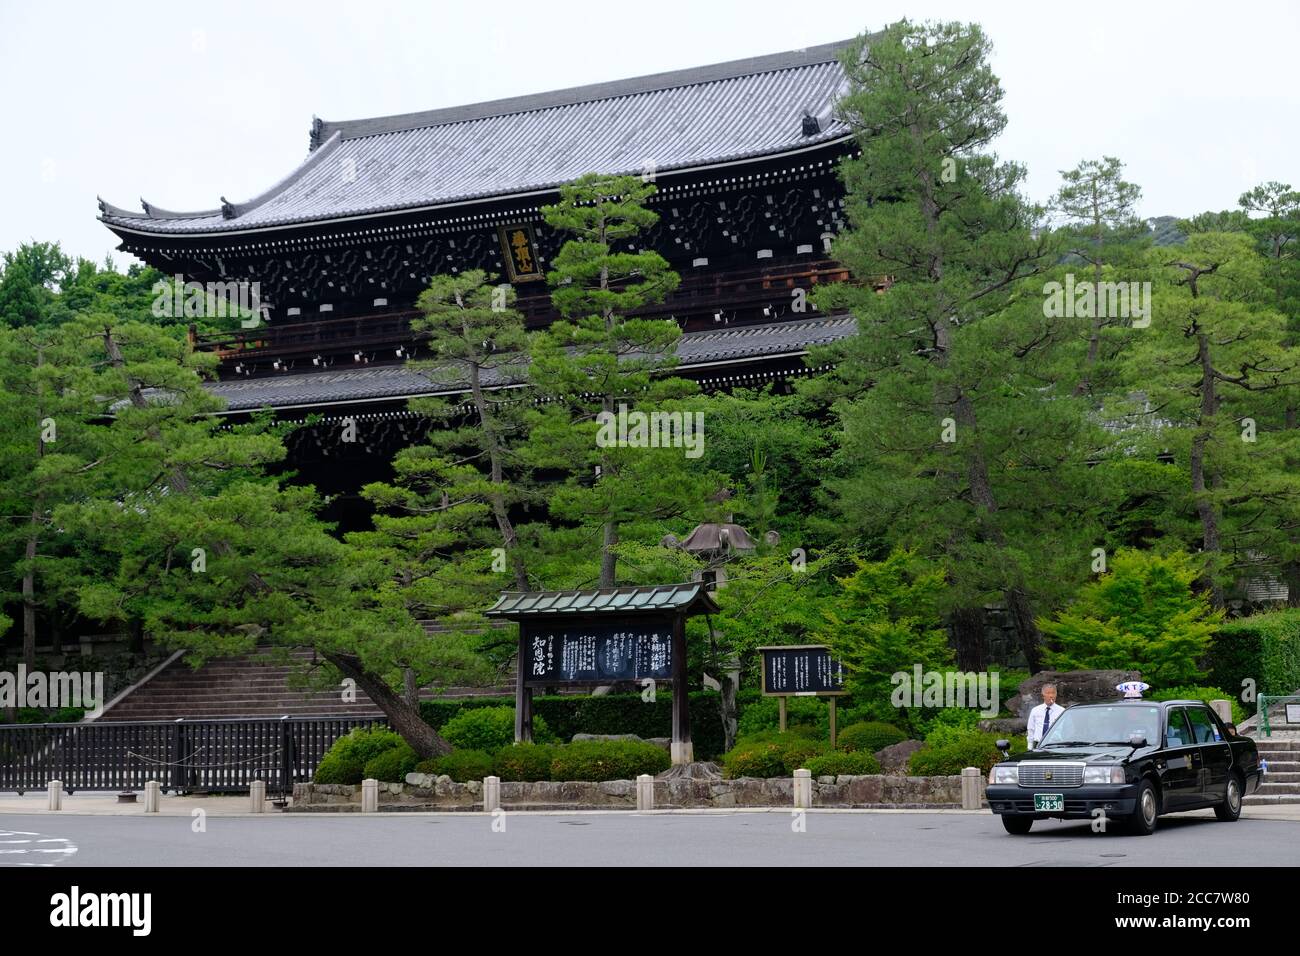 Kyoto Japan - Chion-in Temple main gate street view Stock Photo